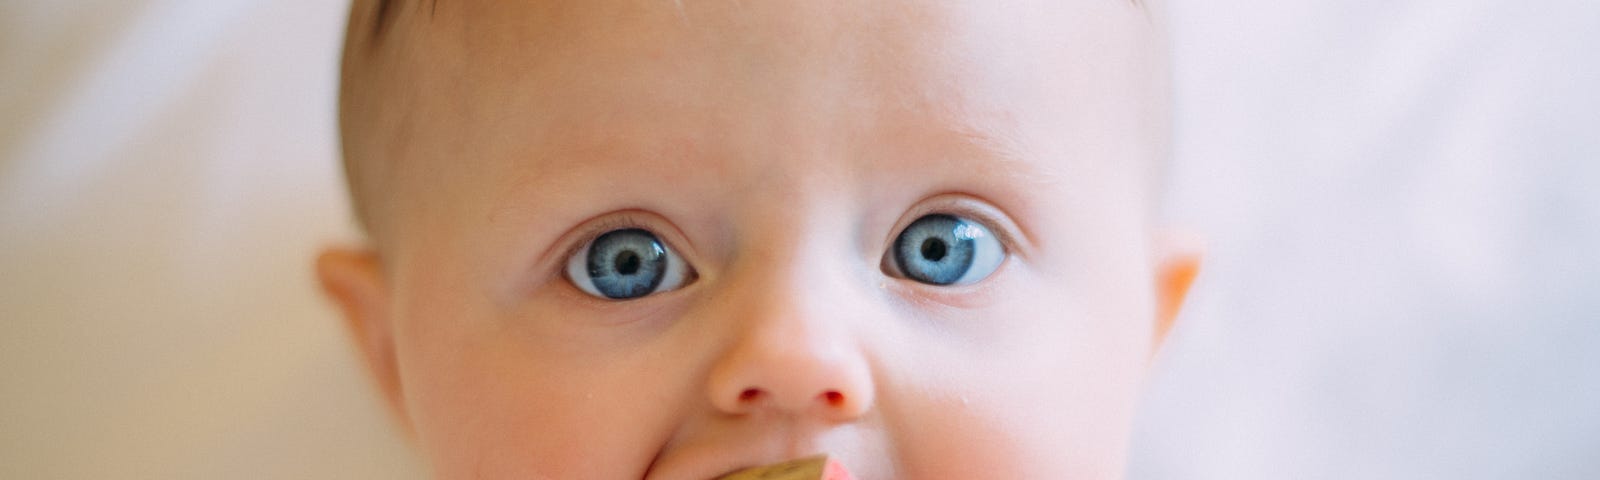 A baby staring into the camera while pushing a wooden block into its mouth